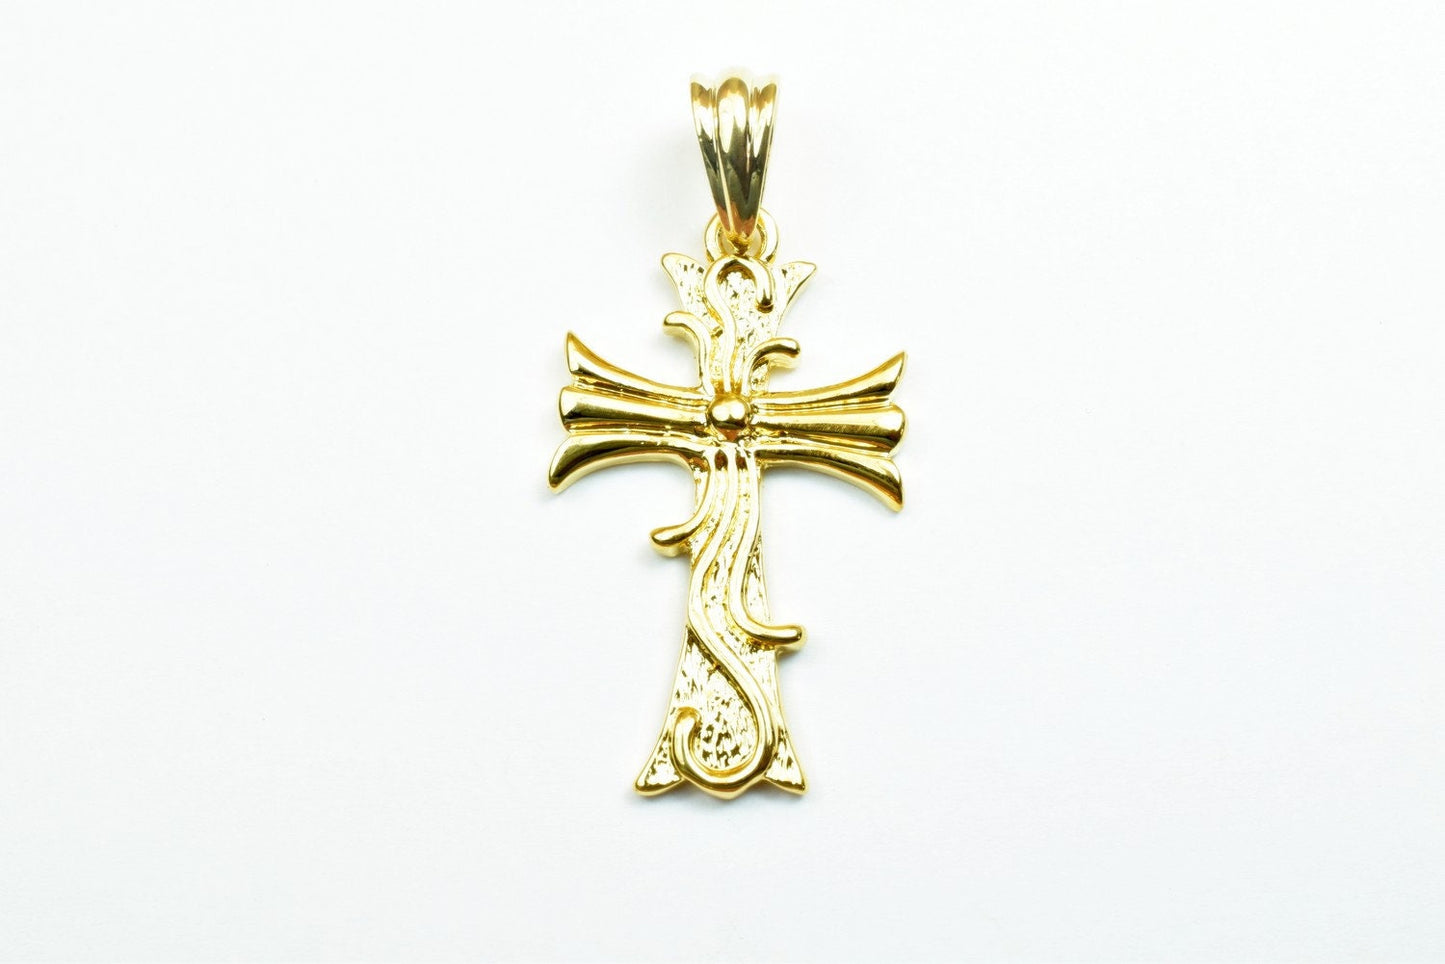 18K as Gold Filled* Cross Pendants Size 38x22mm, Christian Religious Cross Charm, First Communion Baby Baptism For Jewelry Making